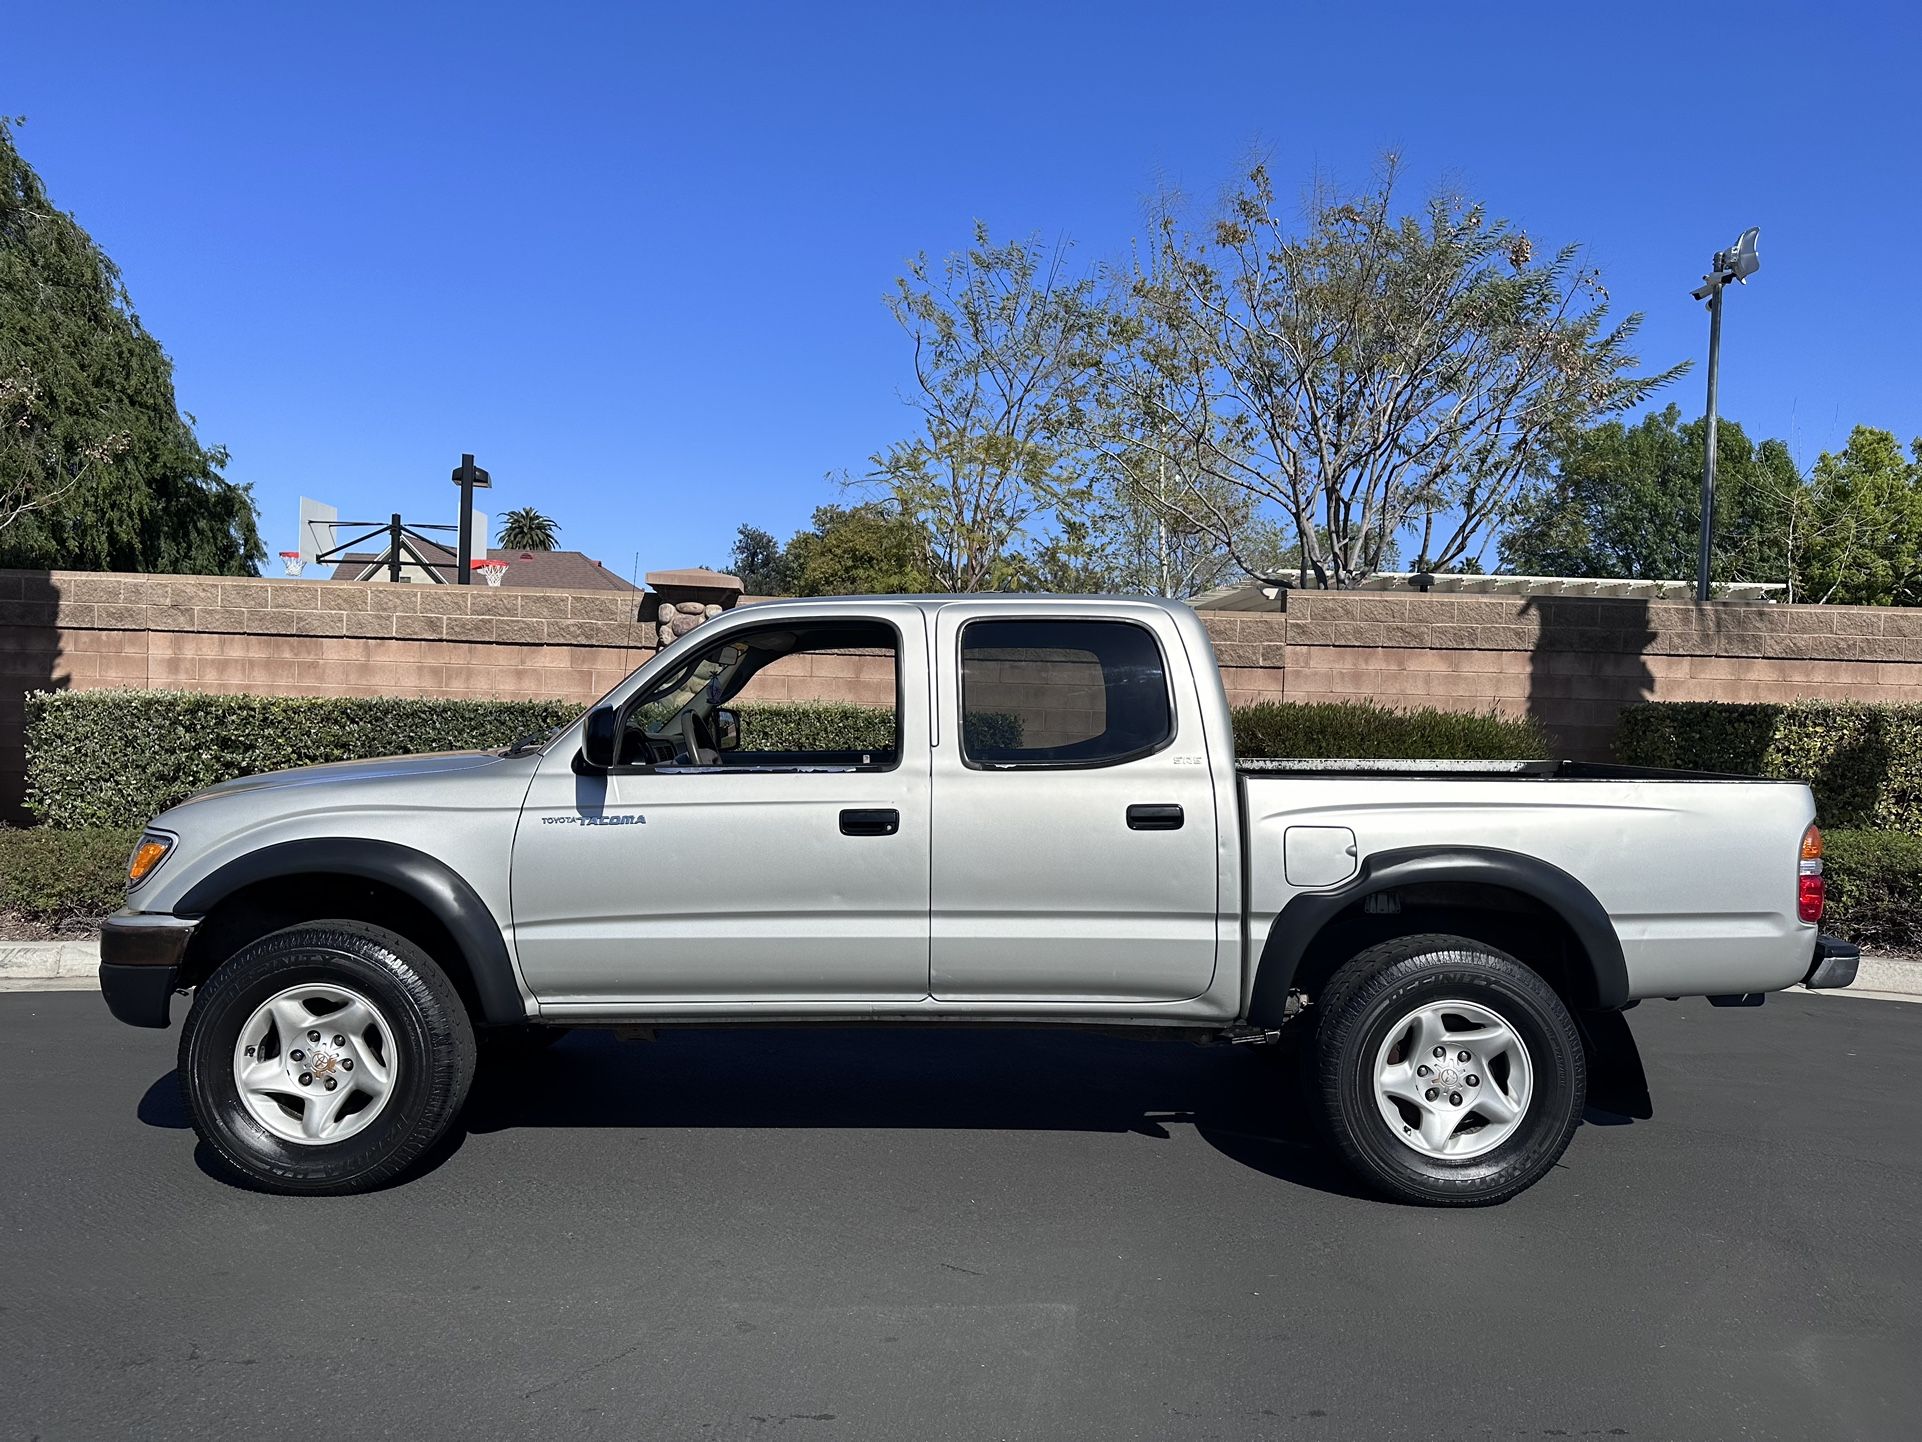 Toyota Tacoma 4 Door Pre-Runner Must See 